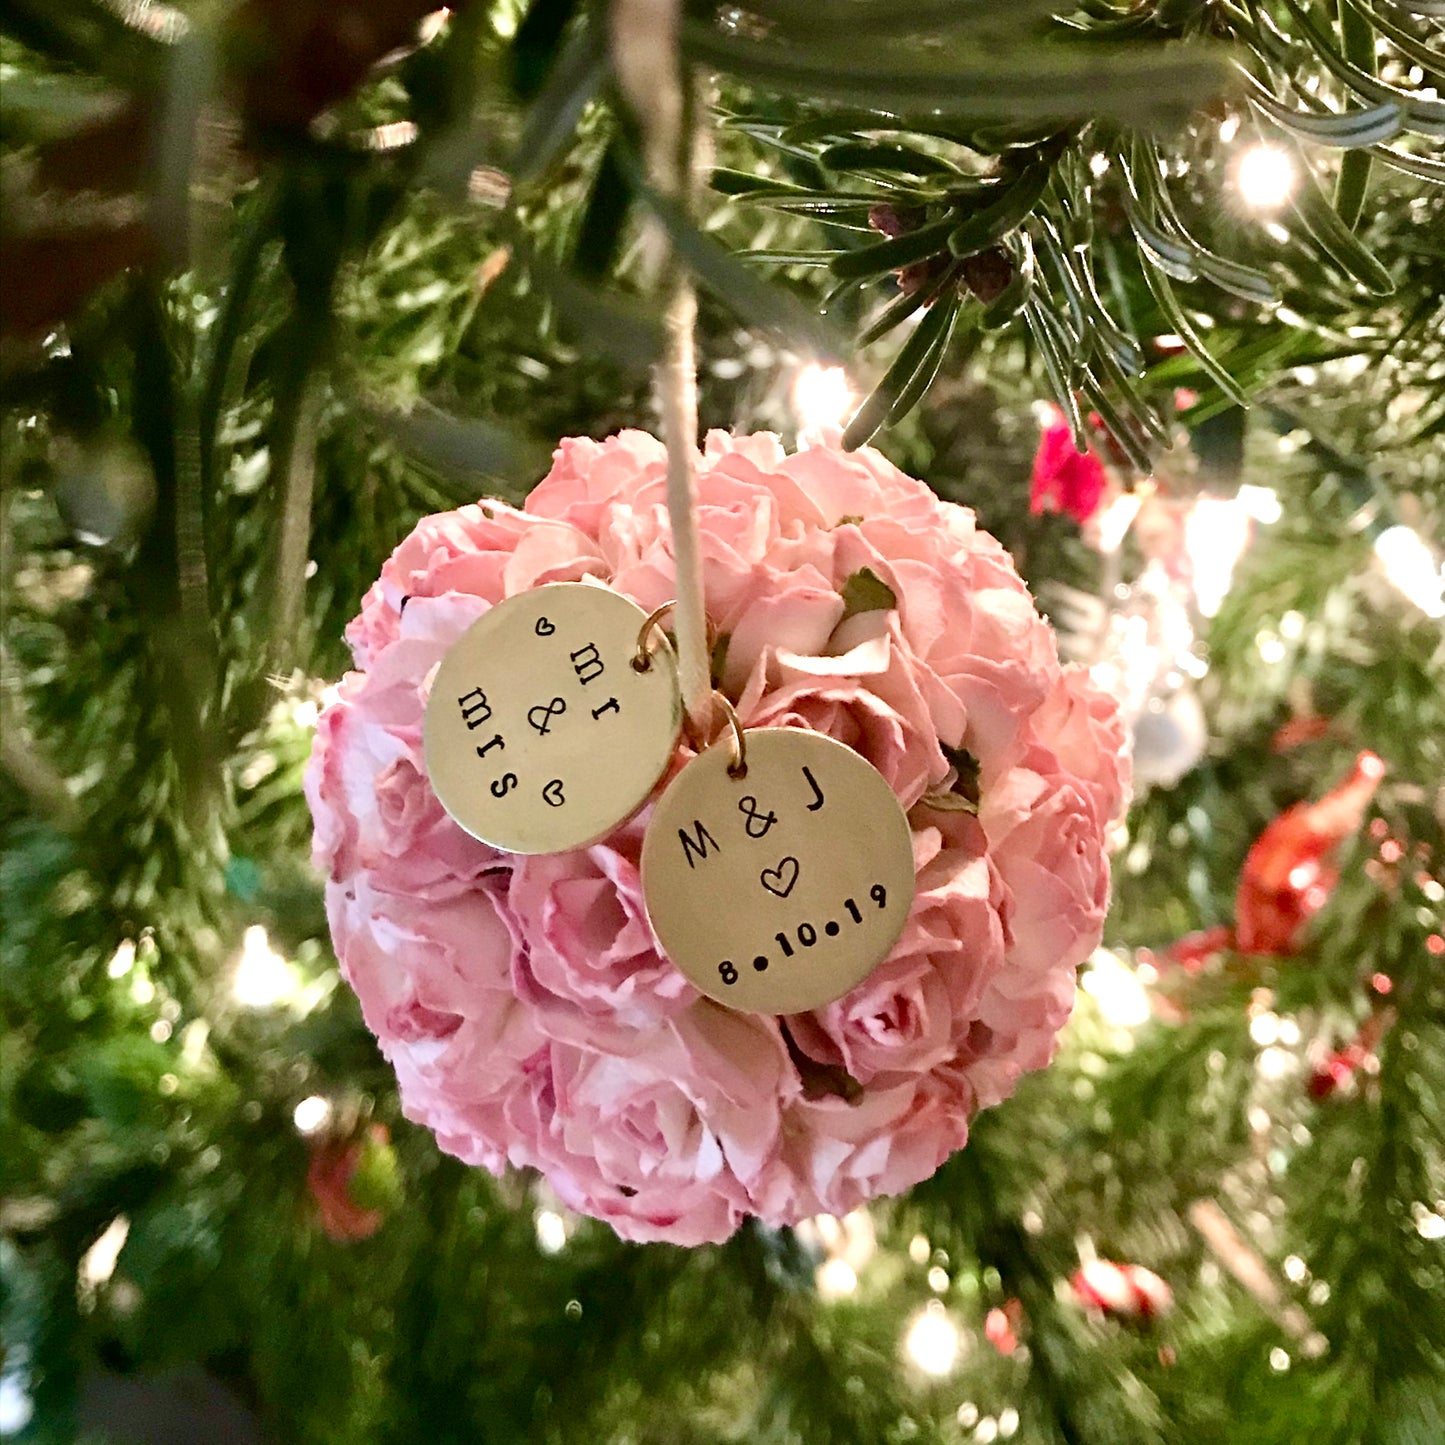 First Christmas Engaged Ornament